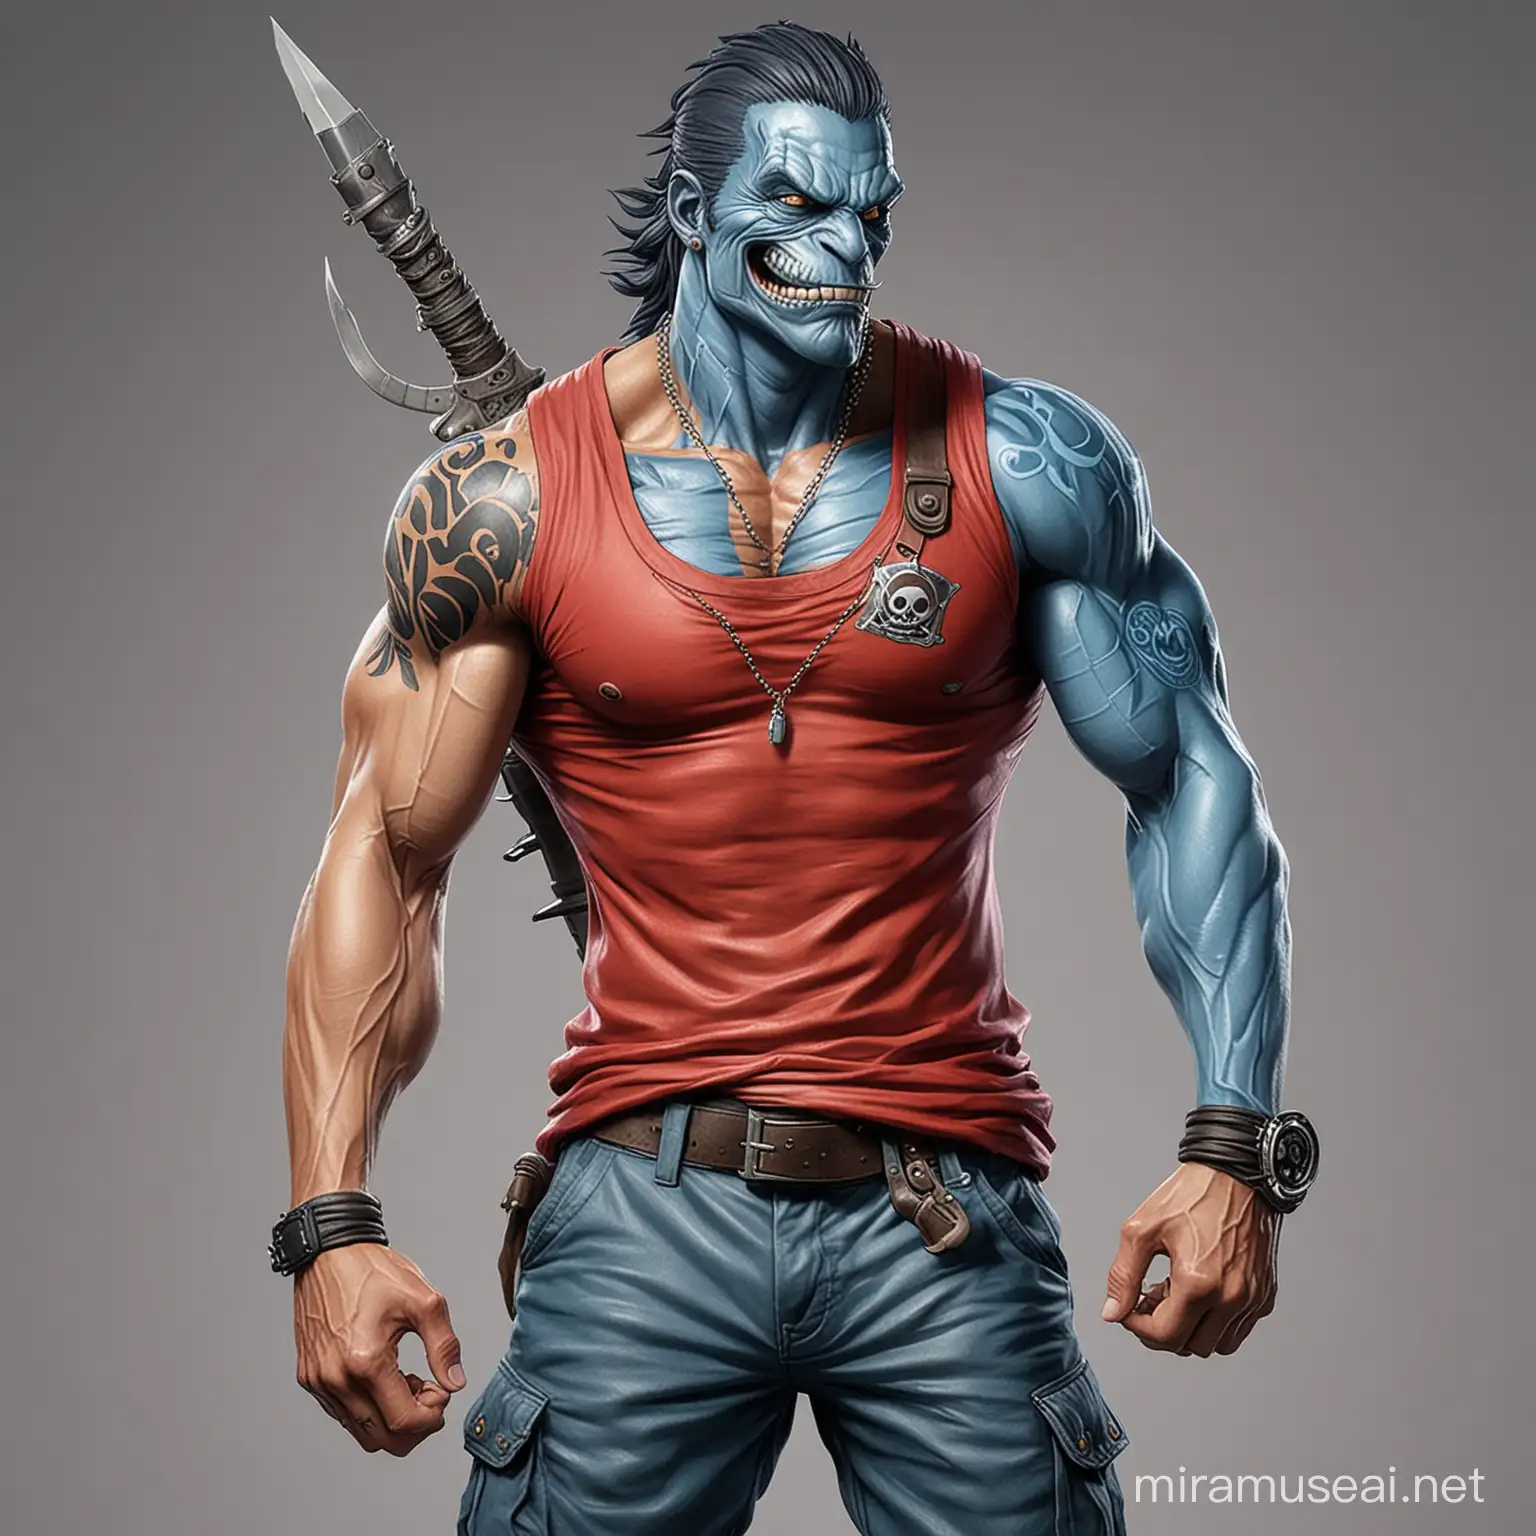 a barracuda fishman from one piece that has silver blue skin, razor jaws, muscular physique, wears cargo pants and a sleeveless red t-shirt, one piece drawing style.